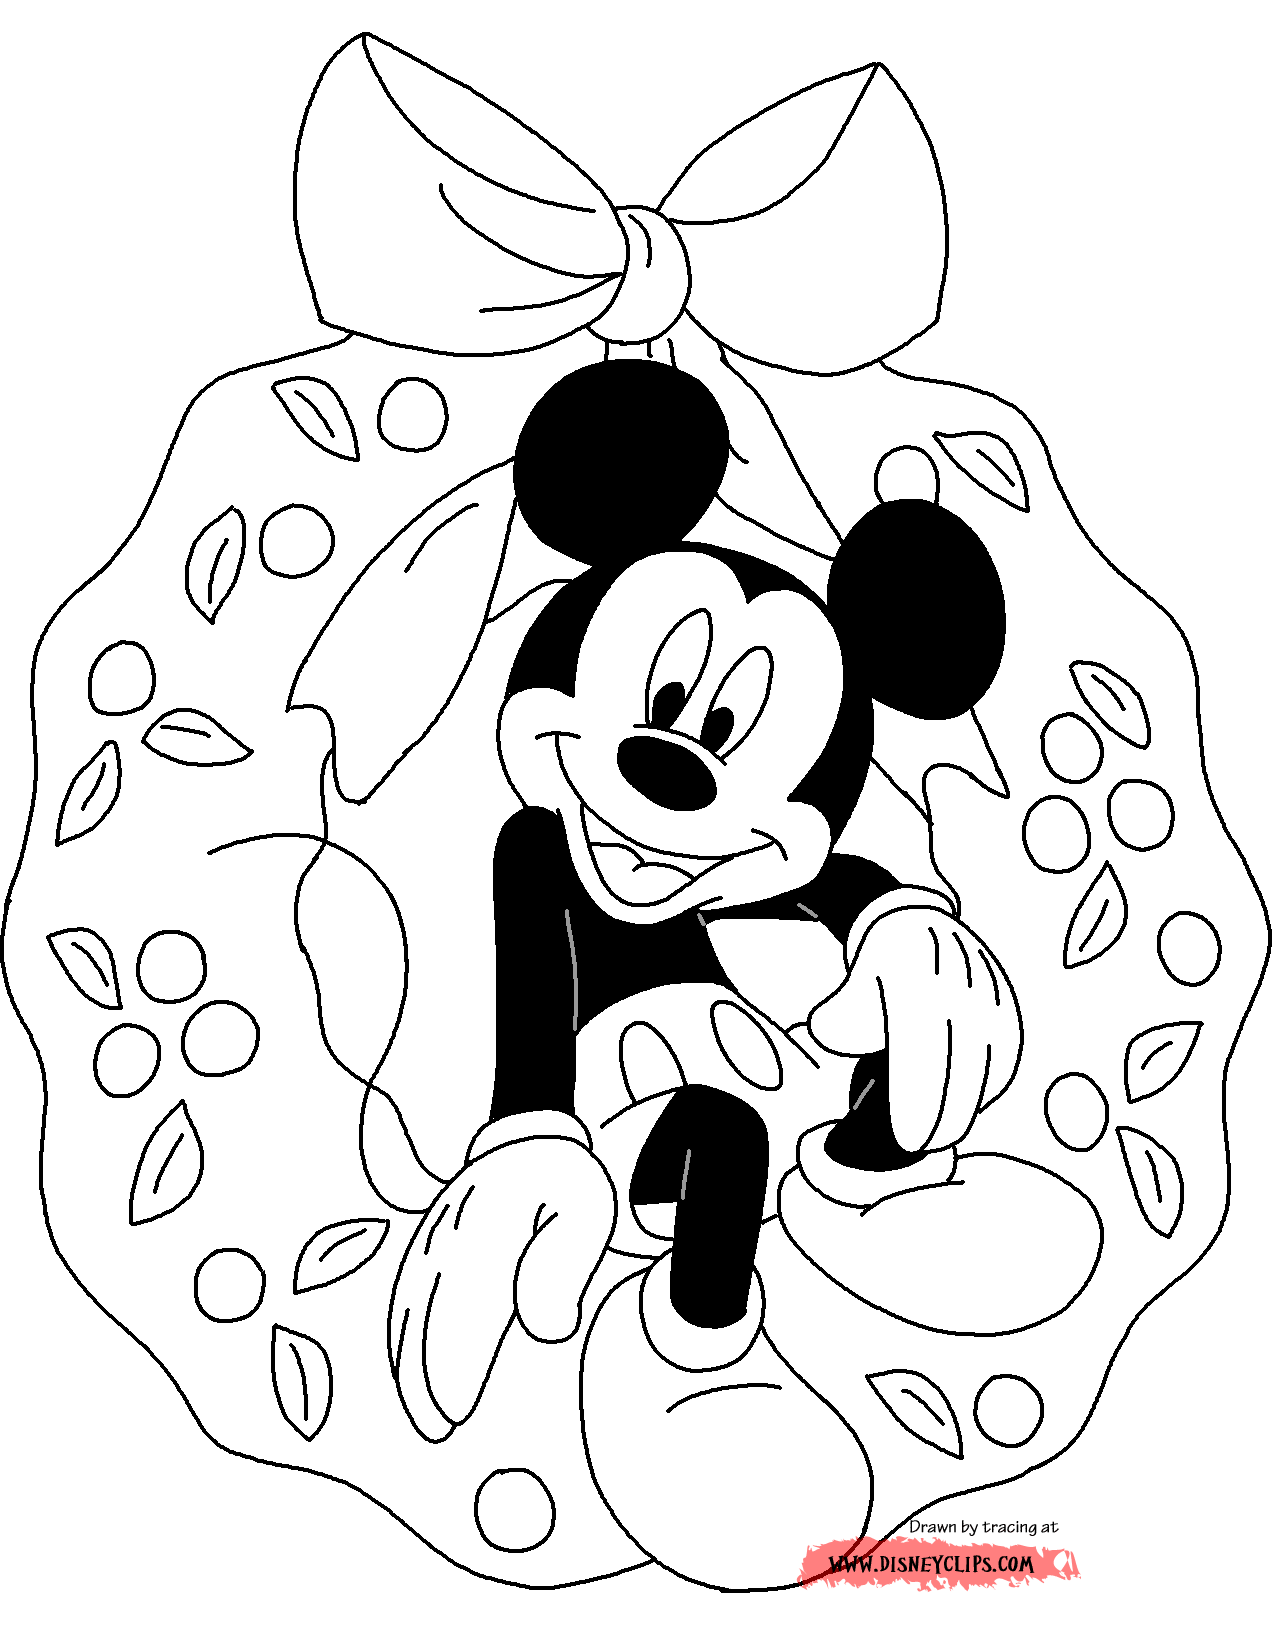 Disney Christmas Coloring Pages 2 | Disneyclips.com